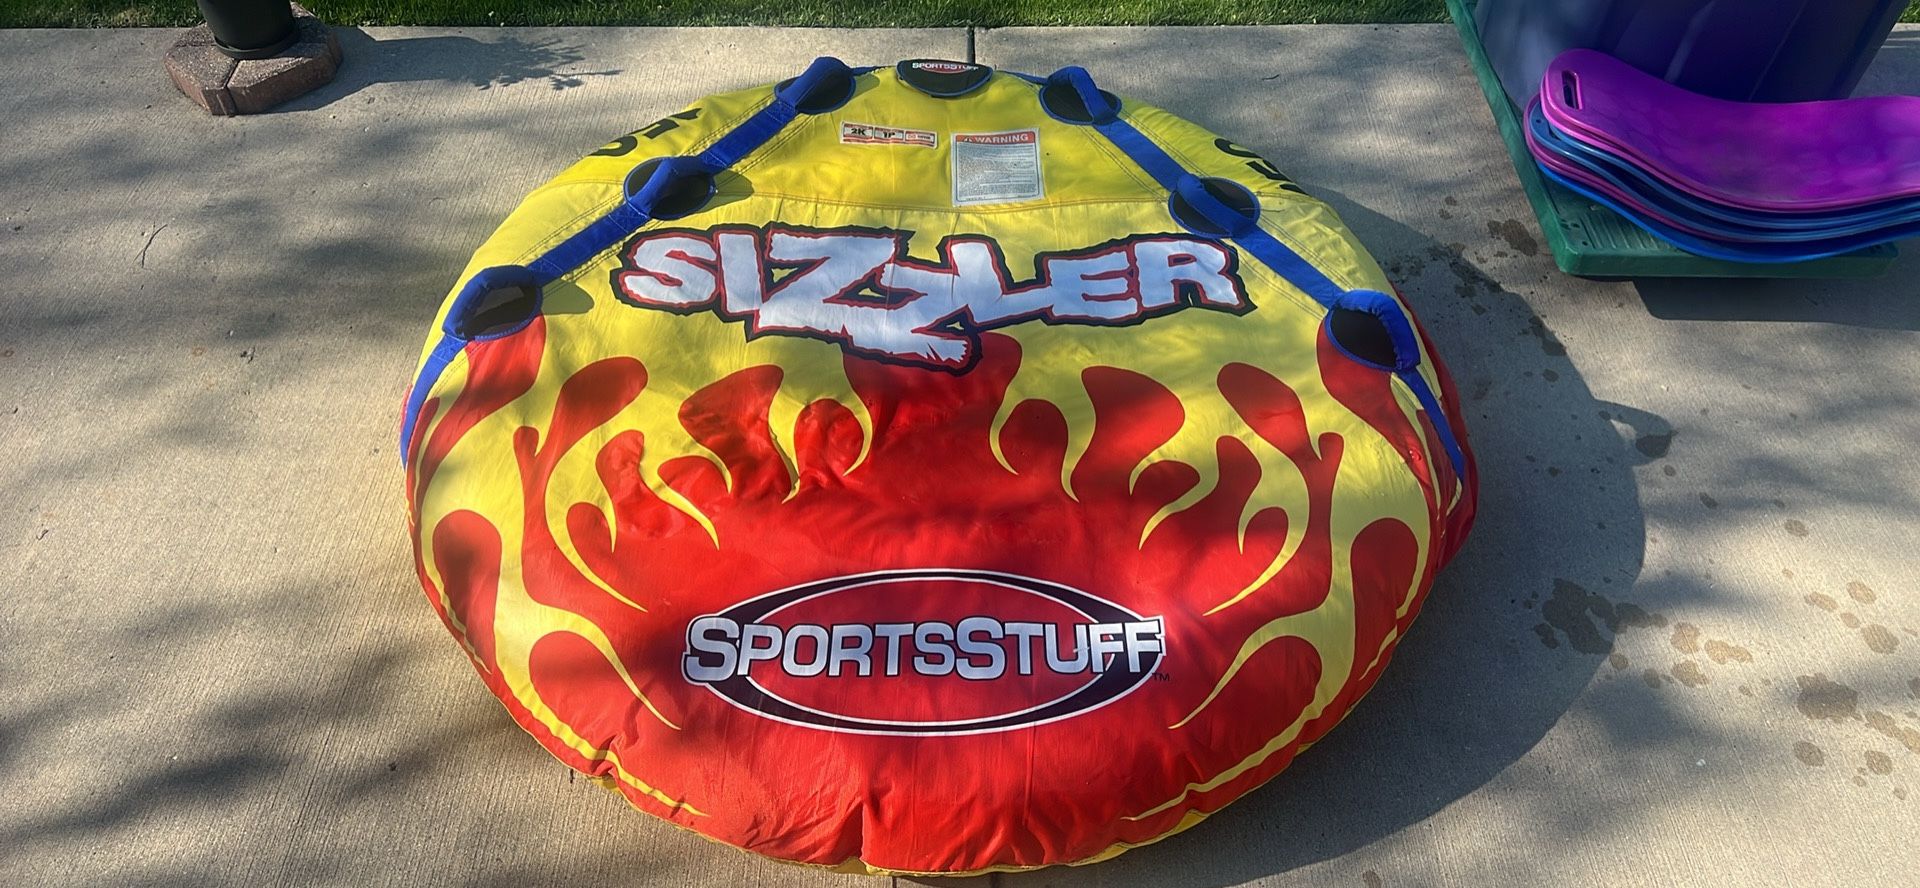 SPORTS STUFF SIZZLER 60" BOAT TUBE LAKES RIVERS. Used and in very good shape.  Asking $40 for ALS fundraiser. 